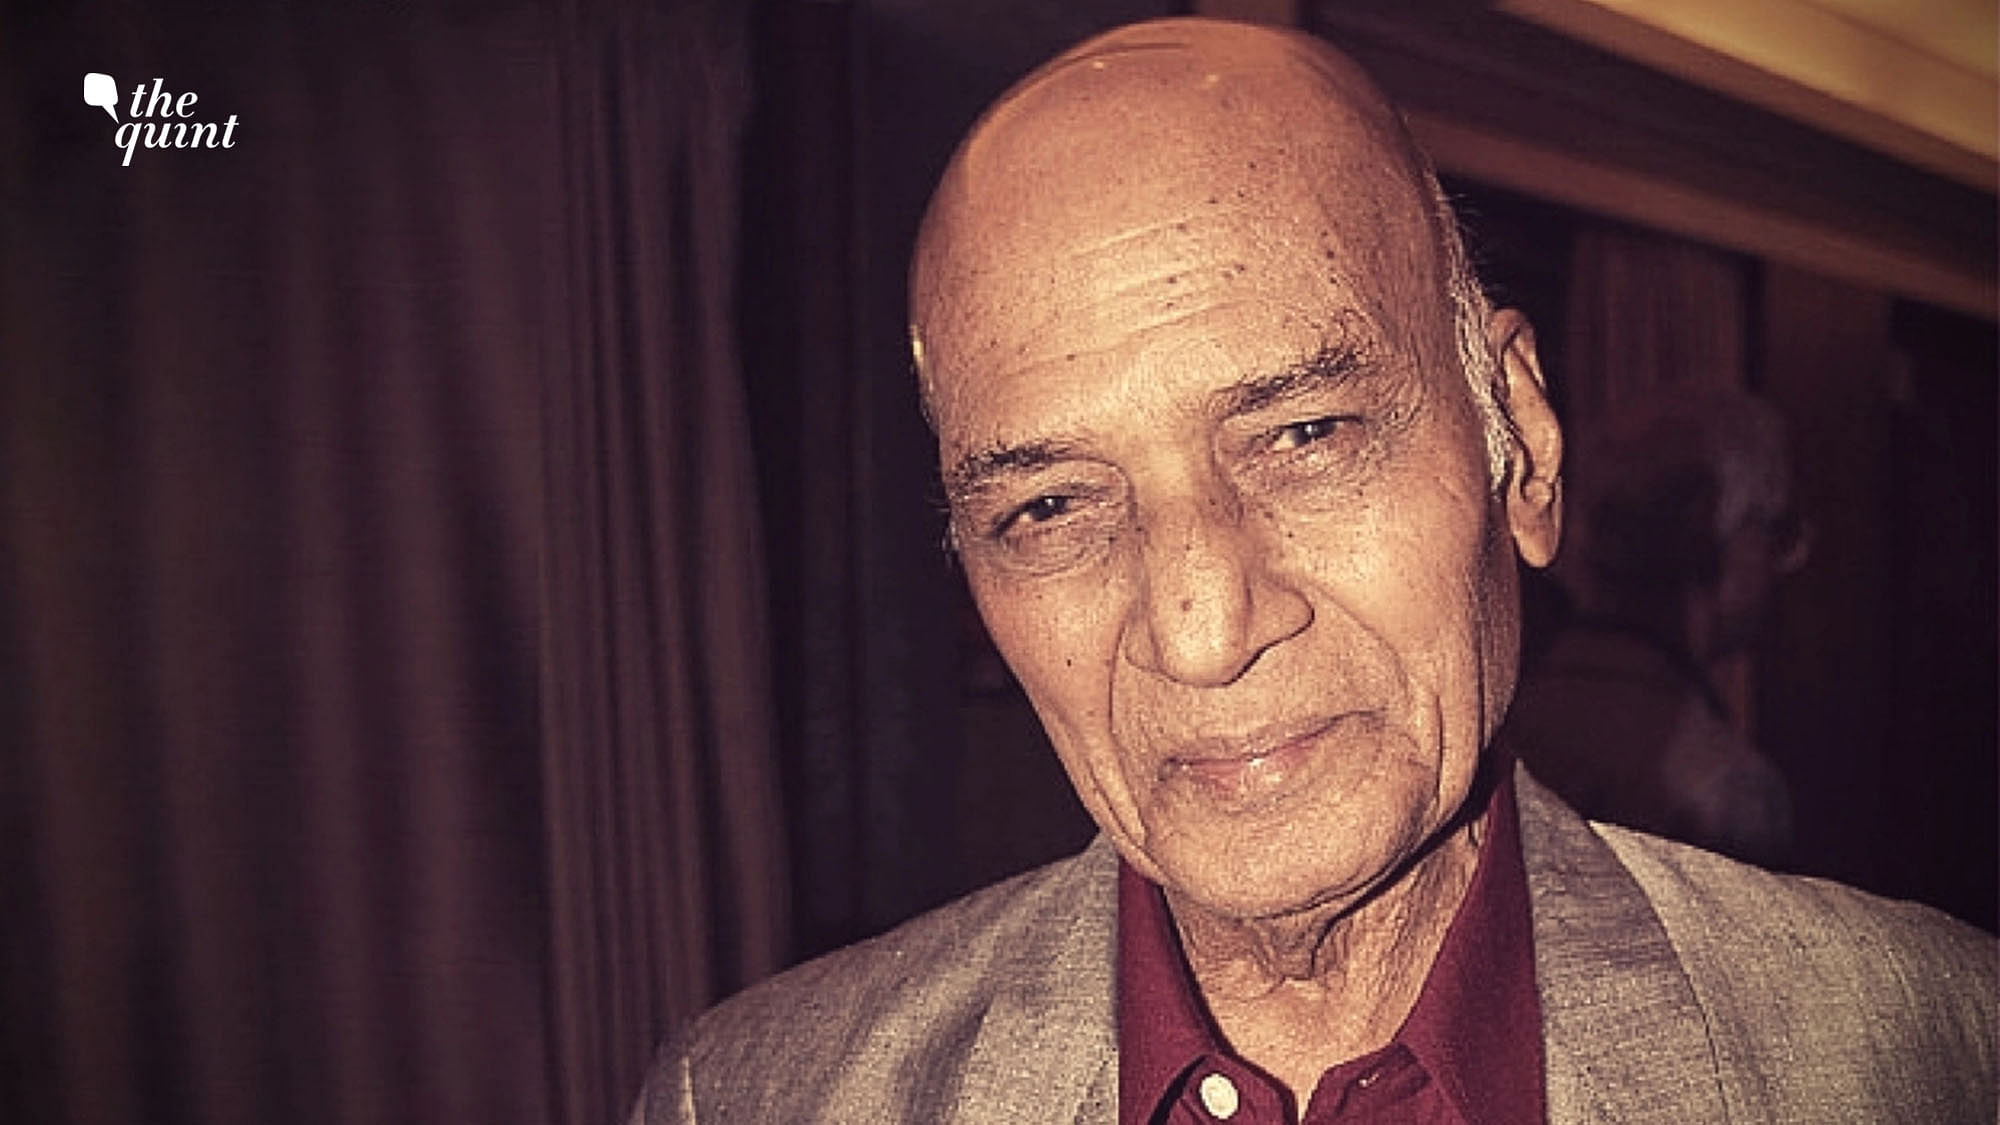 On this podcast we dive into Mohammed Zahur “Khayyam” Hashmi’s life and his musical work which came to define Indian cinema.